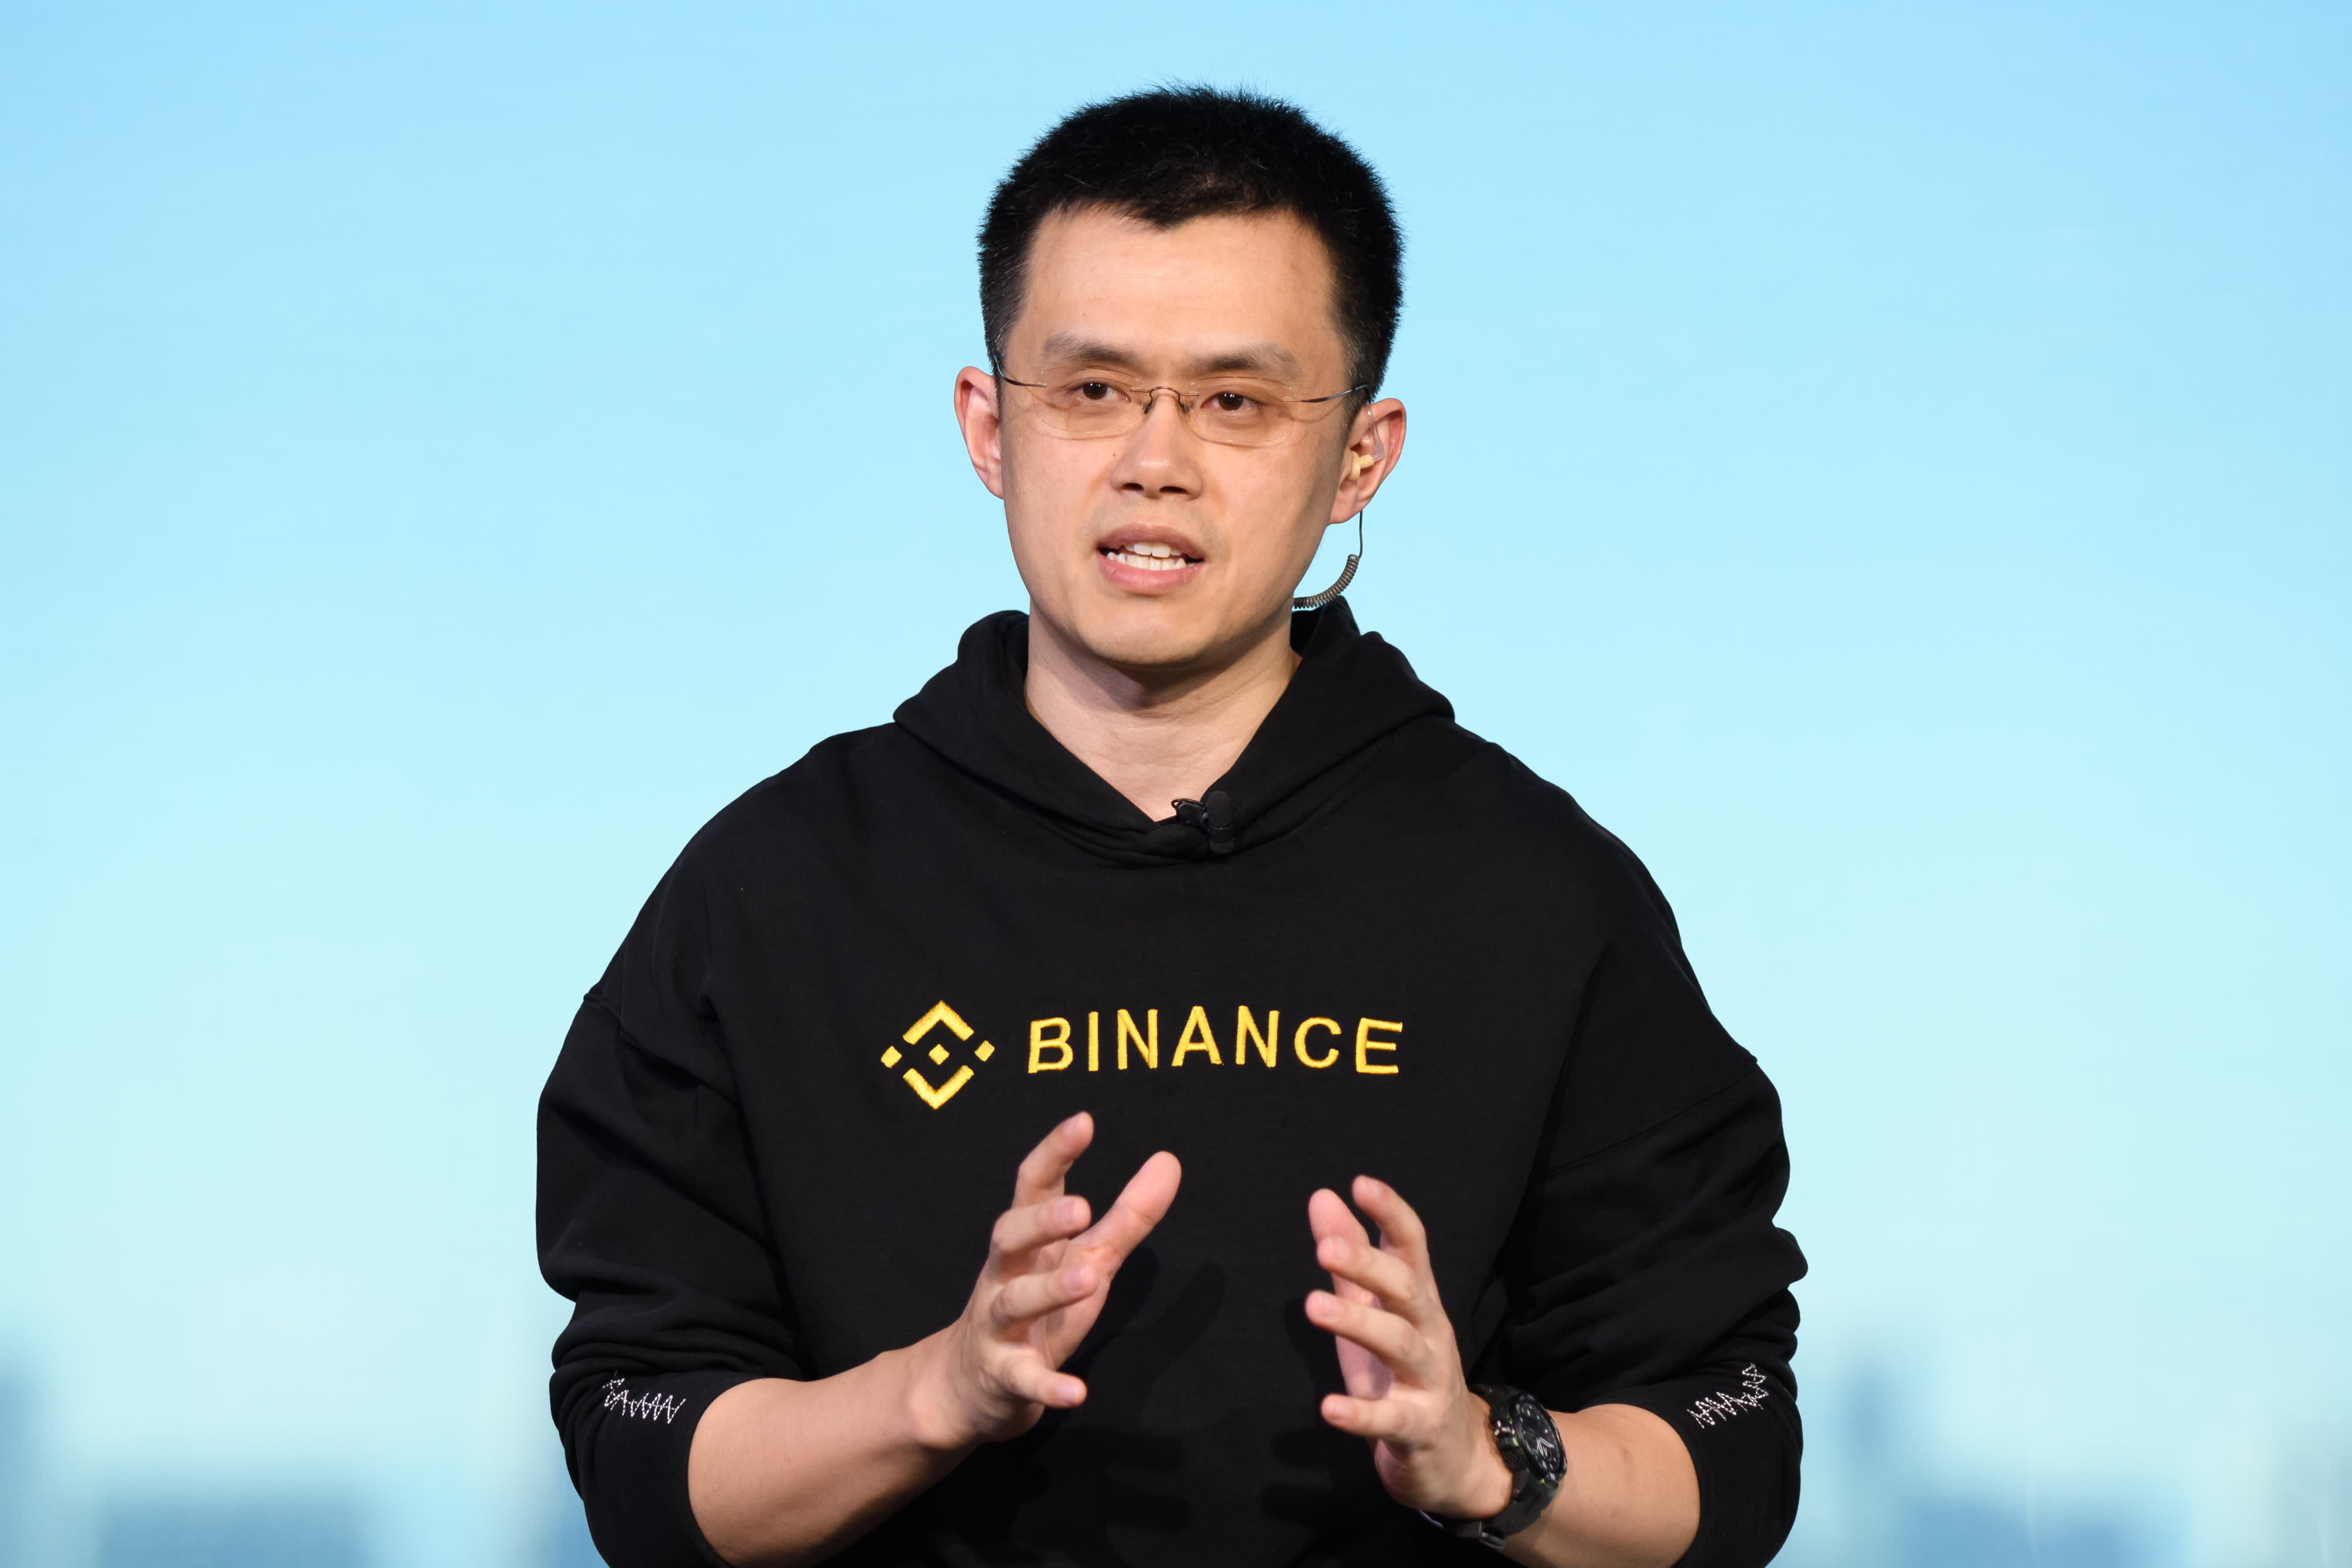 Binance, the world's largest cryptocurrency exchange, gets banned by UK regulator